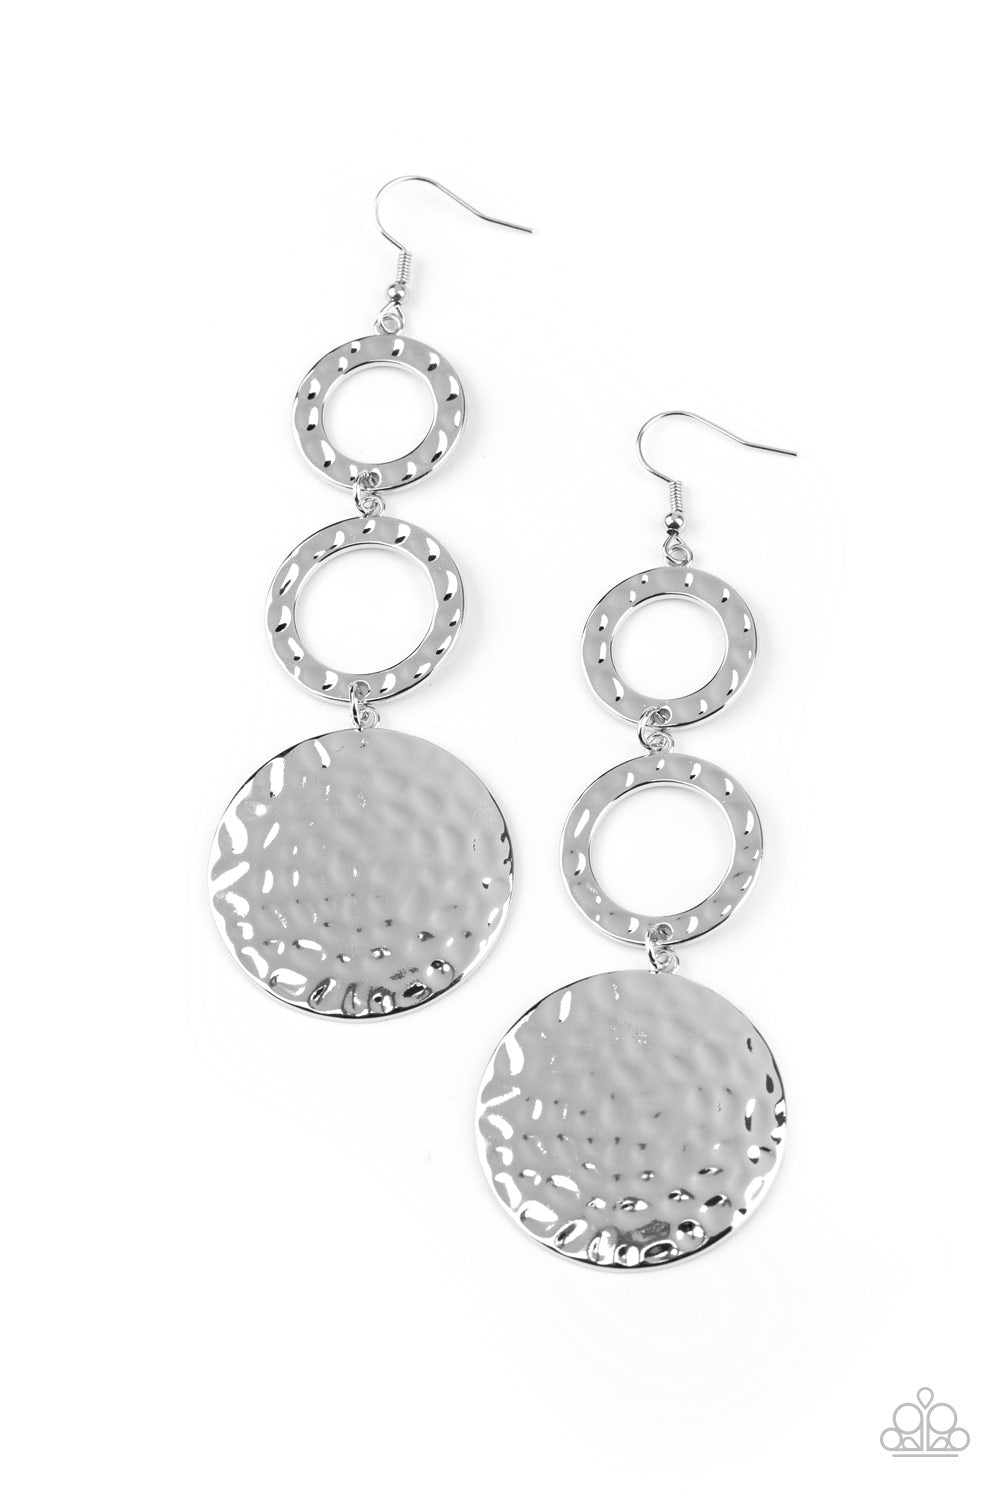 Paparazzi Blooming Baubles - Silver Earring